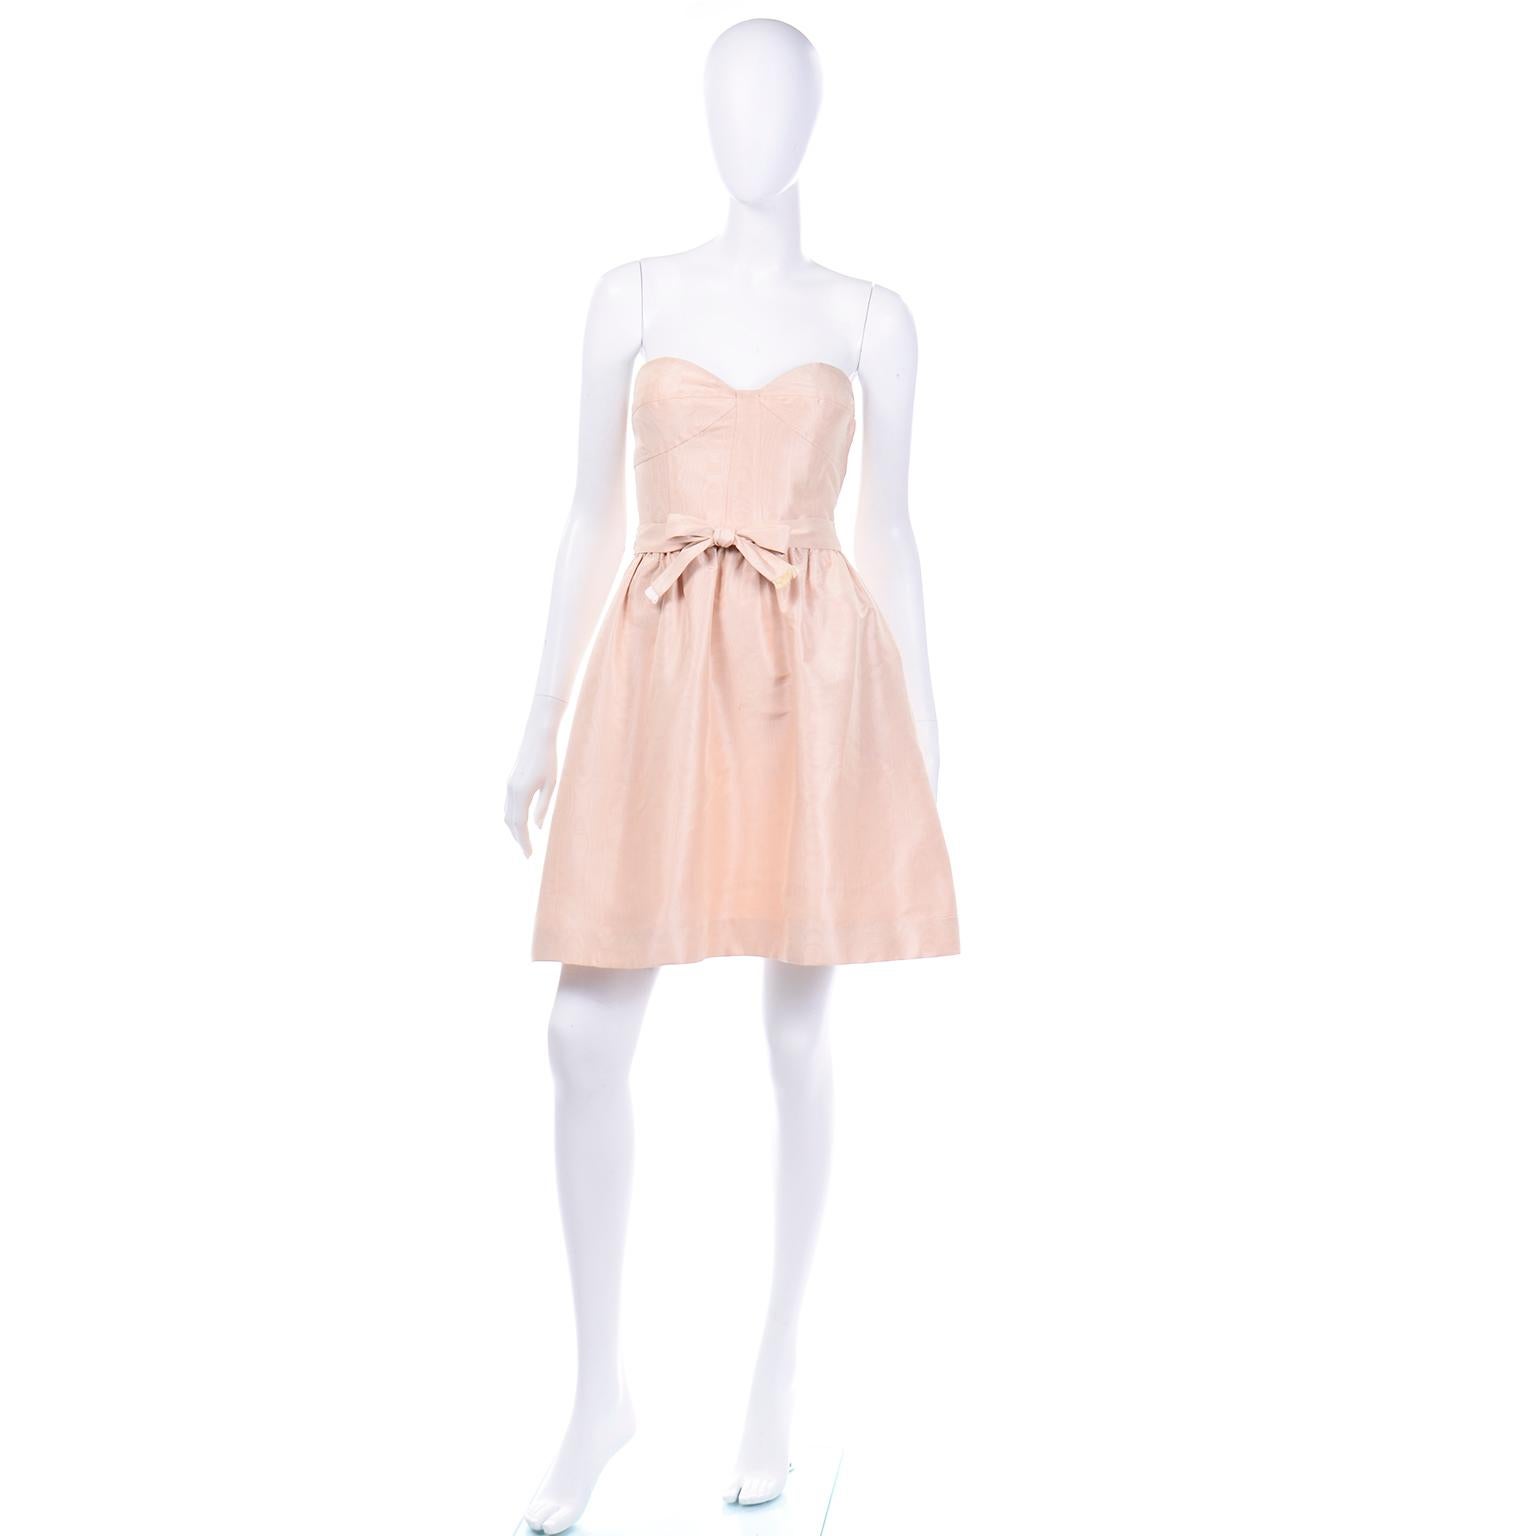 This is a stunning Oscar de la Renta light peach or blush pink wood grain strapless mini dress with a matching belt. This dress is in a beautiful and unique wood grain taffeta fabric and has built-in underwired cups with a corset top. The inside has